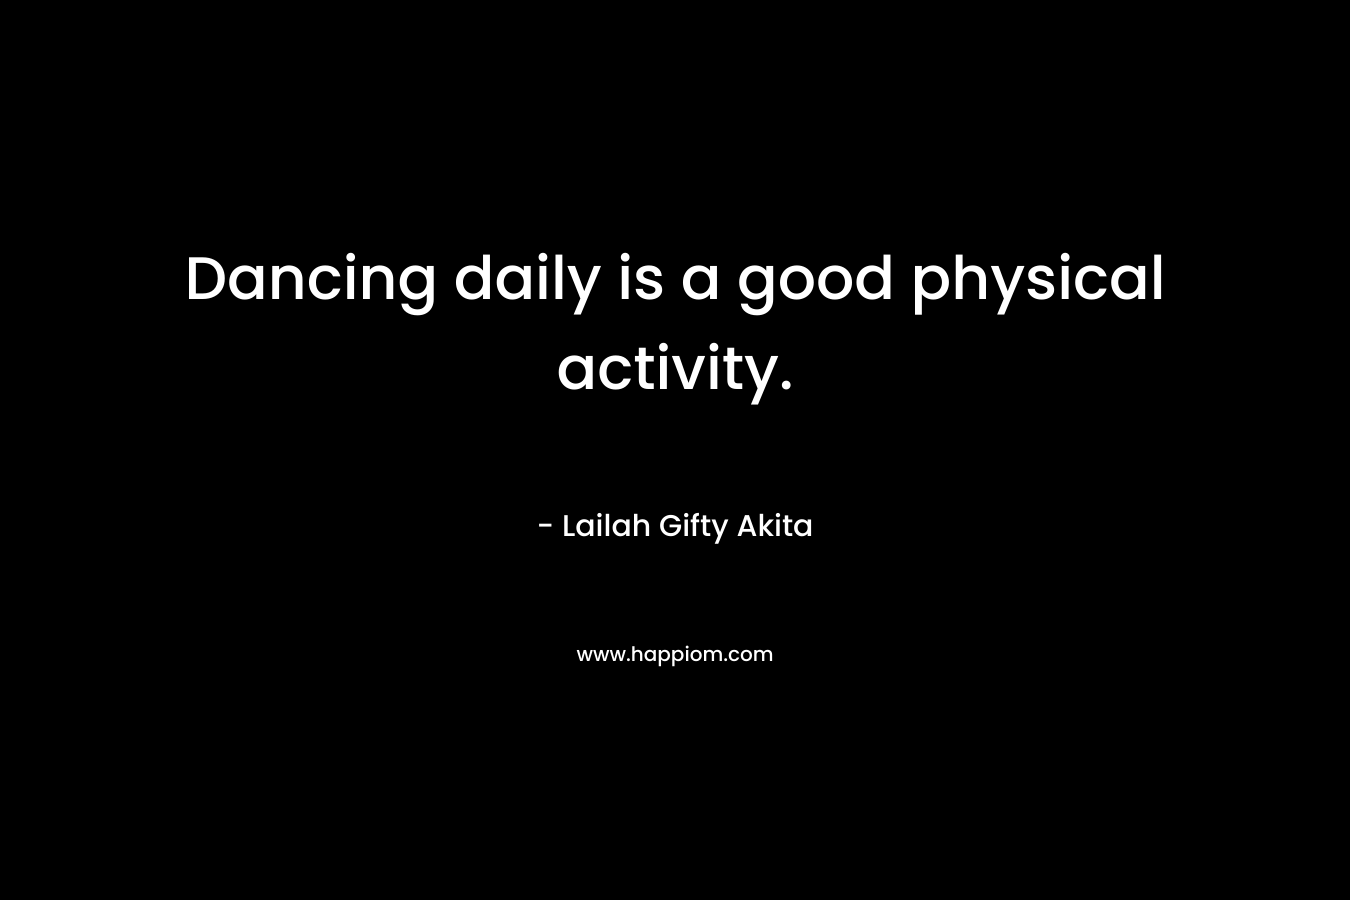 Dancing daily is a good physical activity.